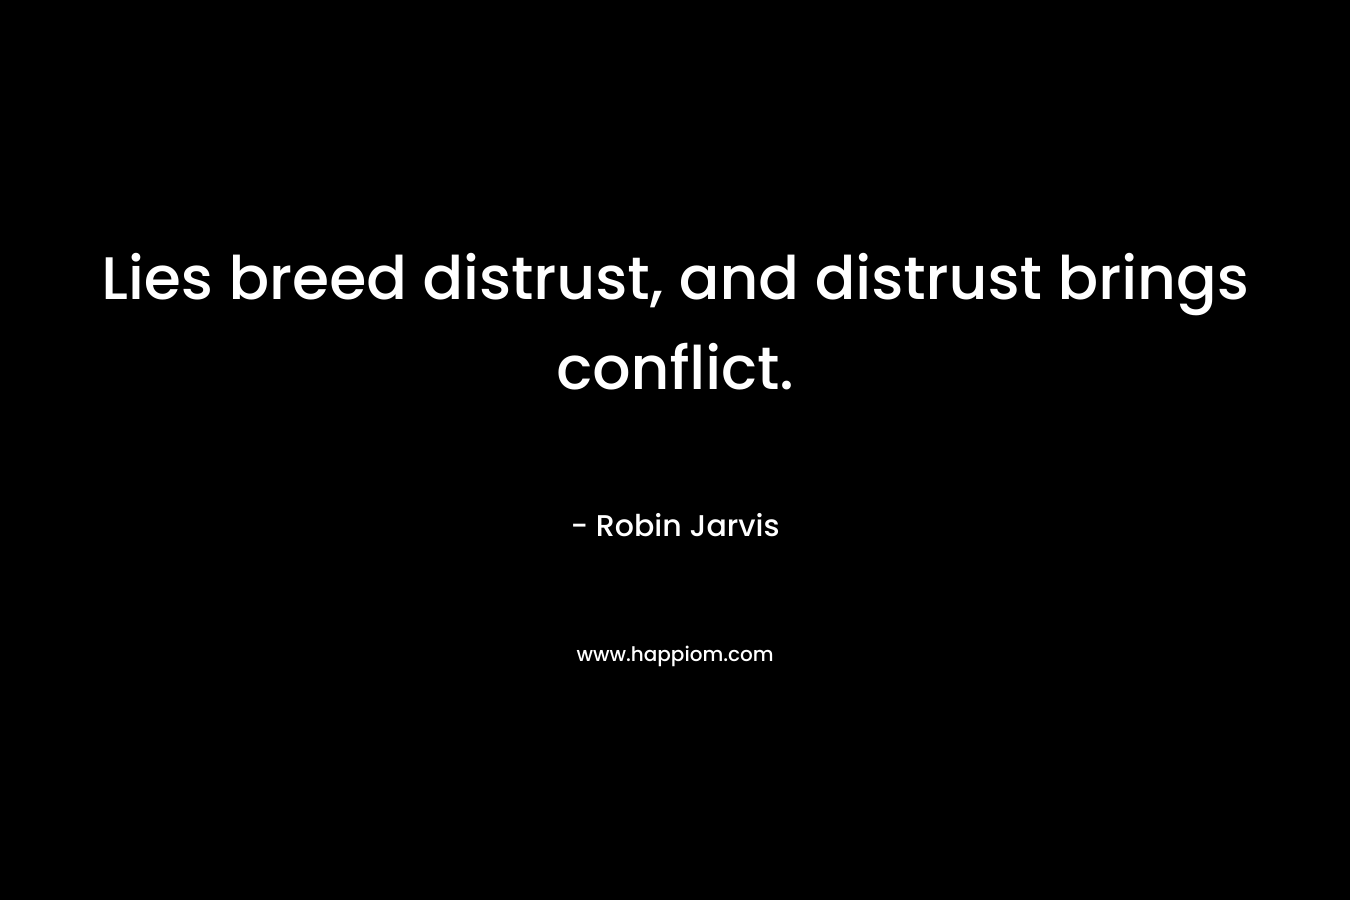 Lies breed distrust, and distrust brings conflict. – Robin Jarvis